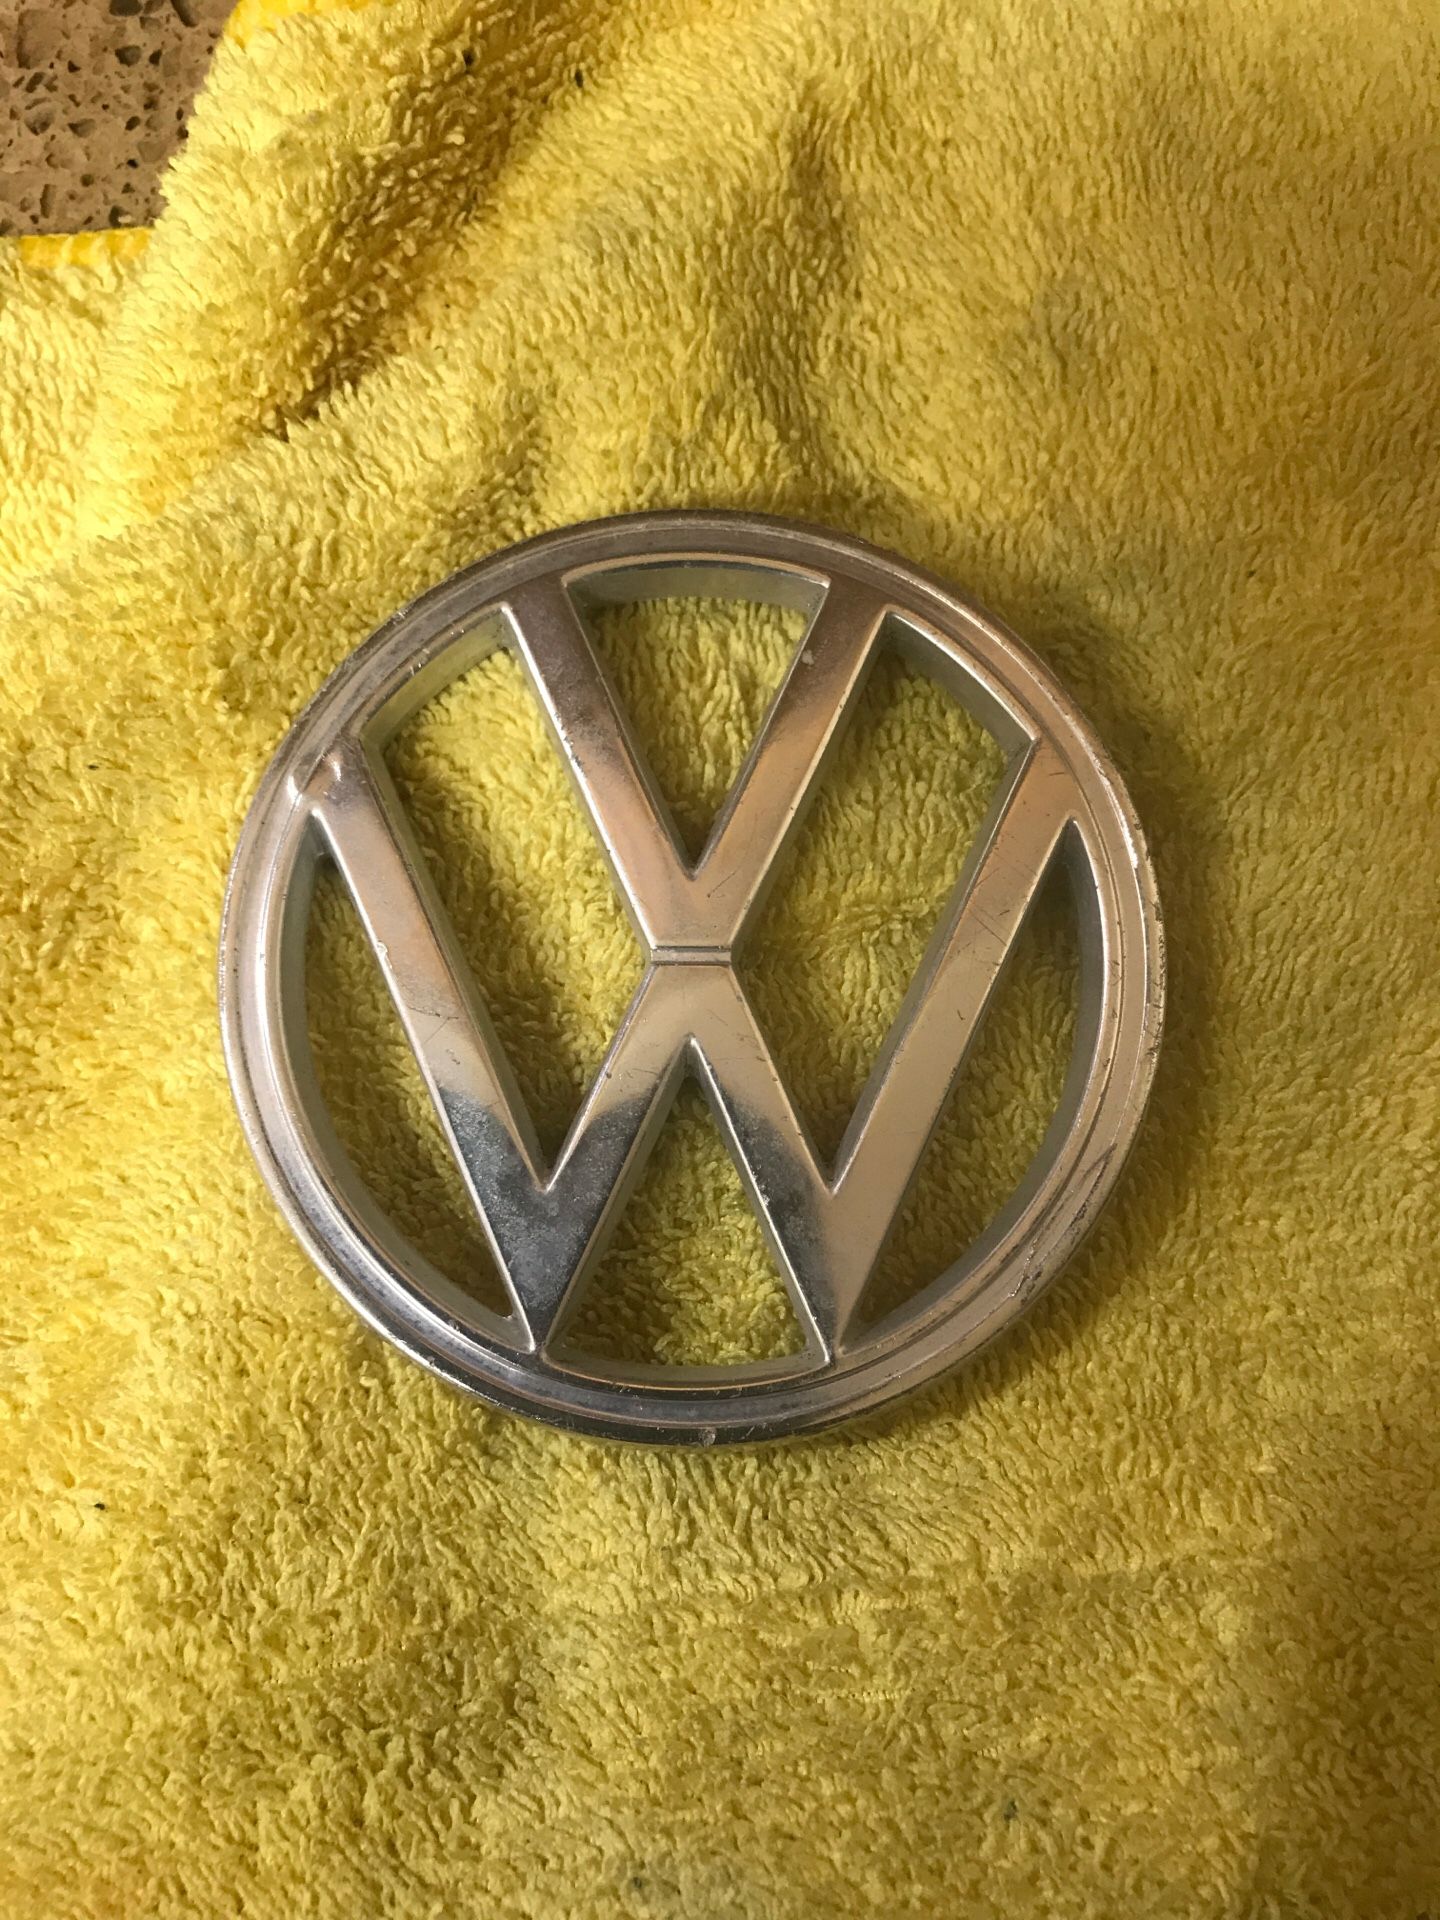 Anyone know were this goes to I know it goes on a Volkswagen but were❓❓❓❓❓